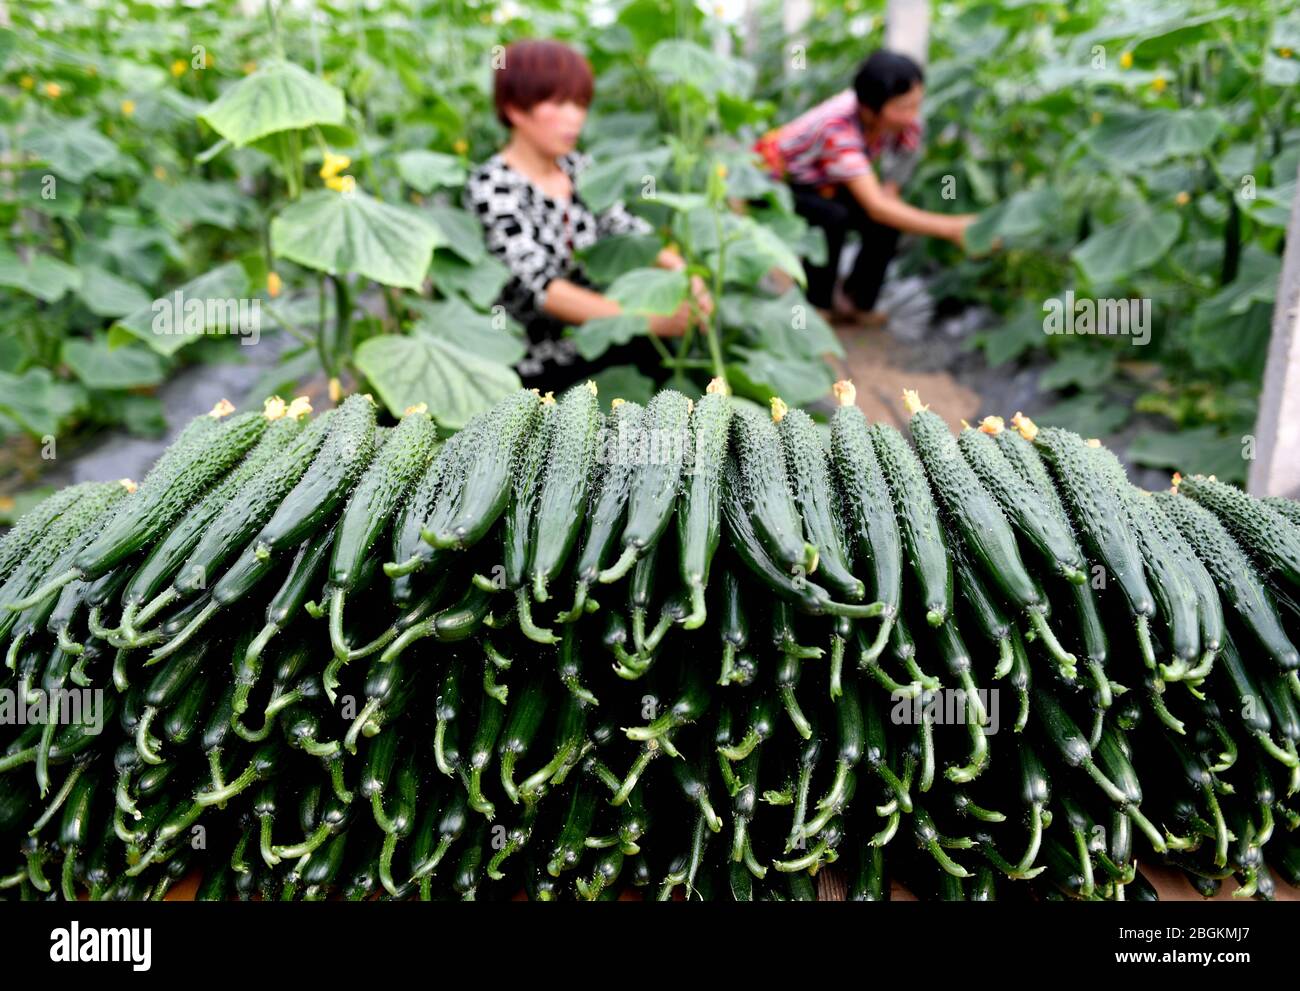 Farmers reap ripe cucumber, and pack and send them for both selling and meeting the demand of local government that providing adequate food supply for Stock Photo